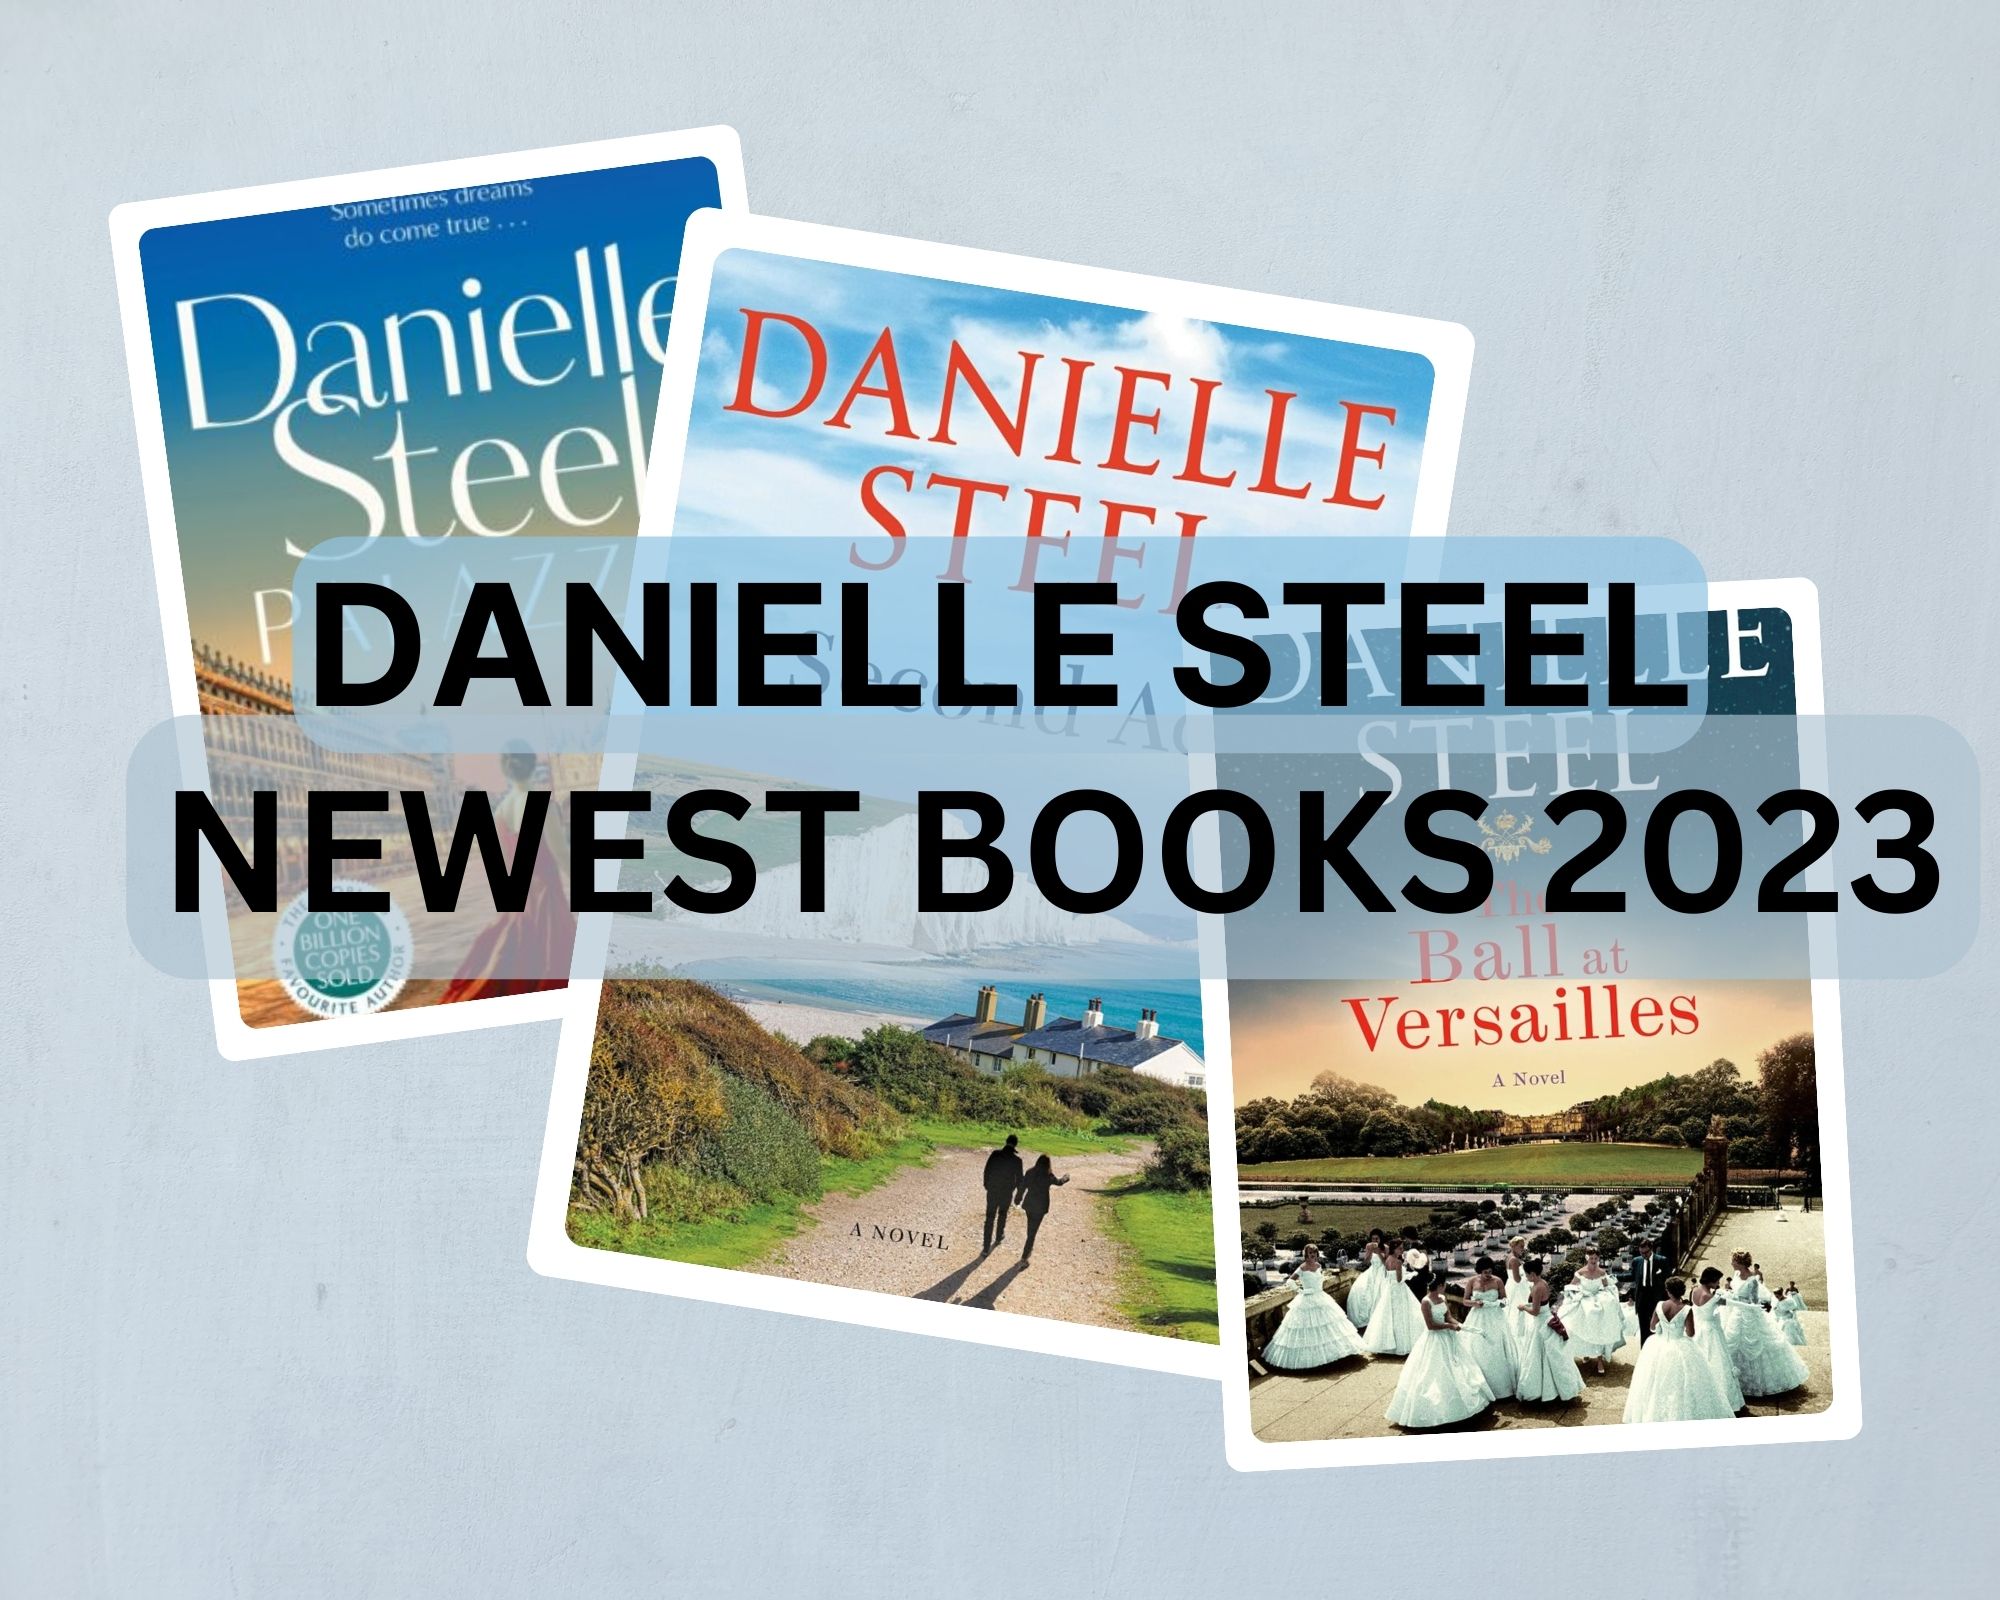 Danielle Steel Newest Books 2023 - Each New Release This Year - Check Reads